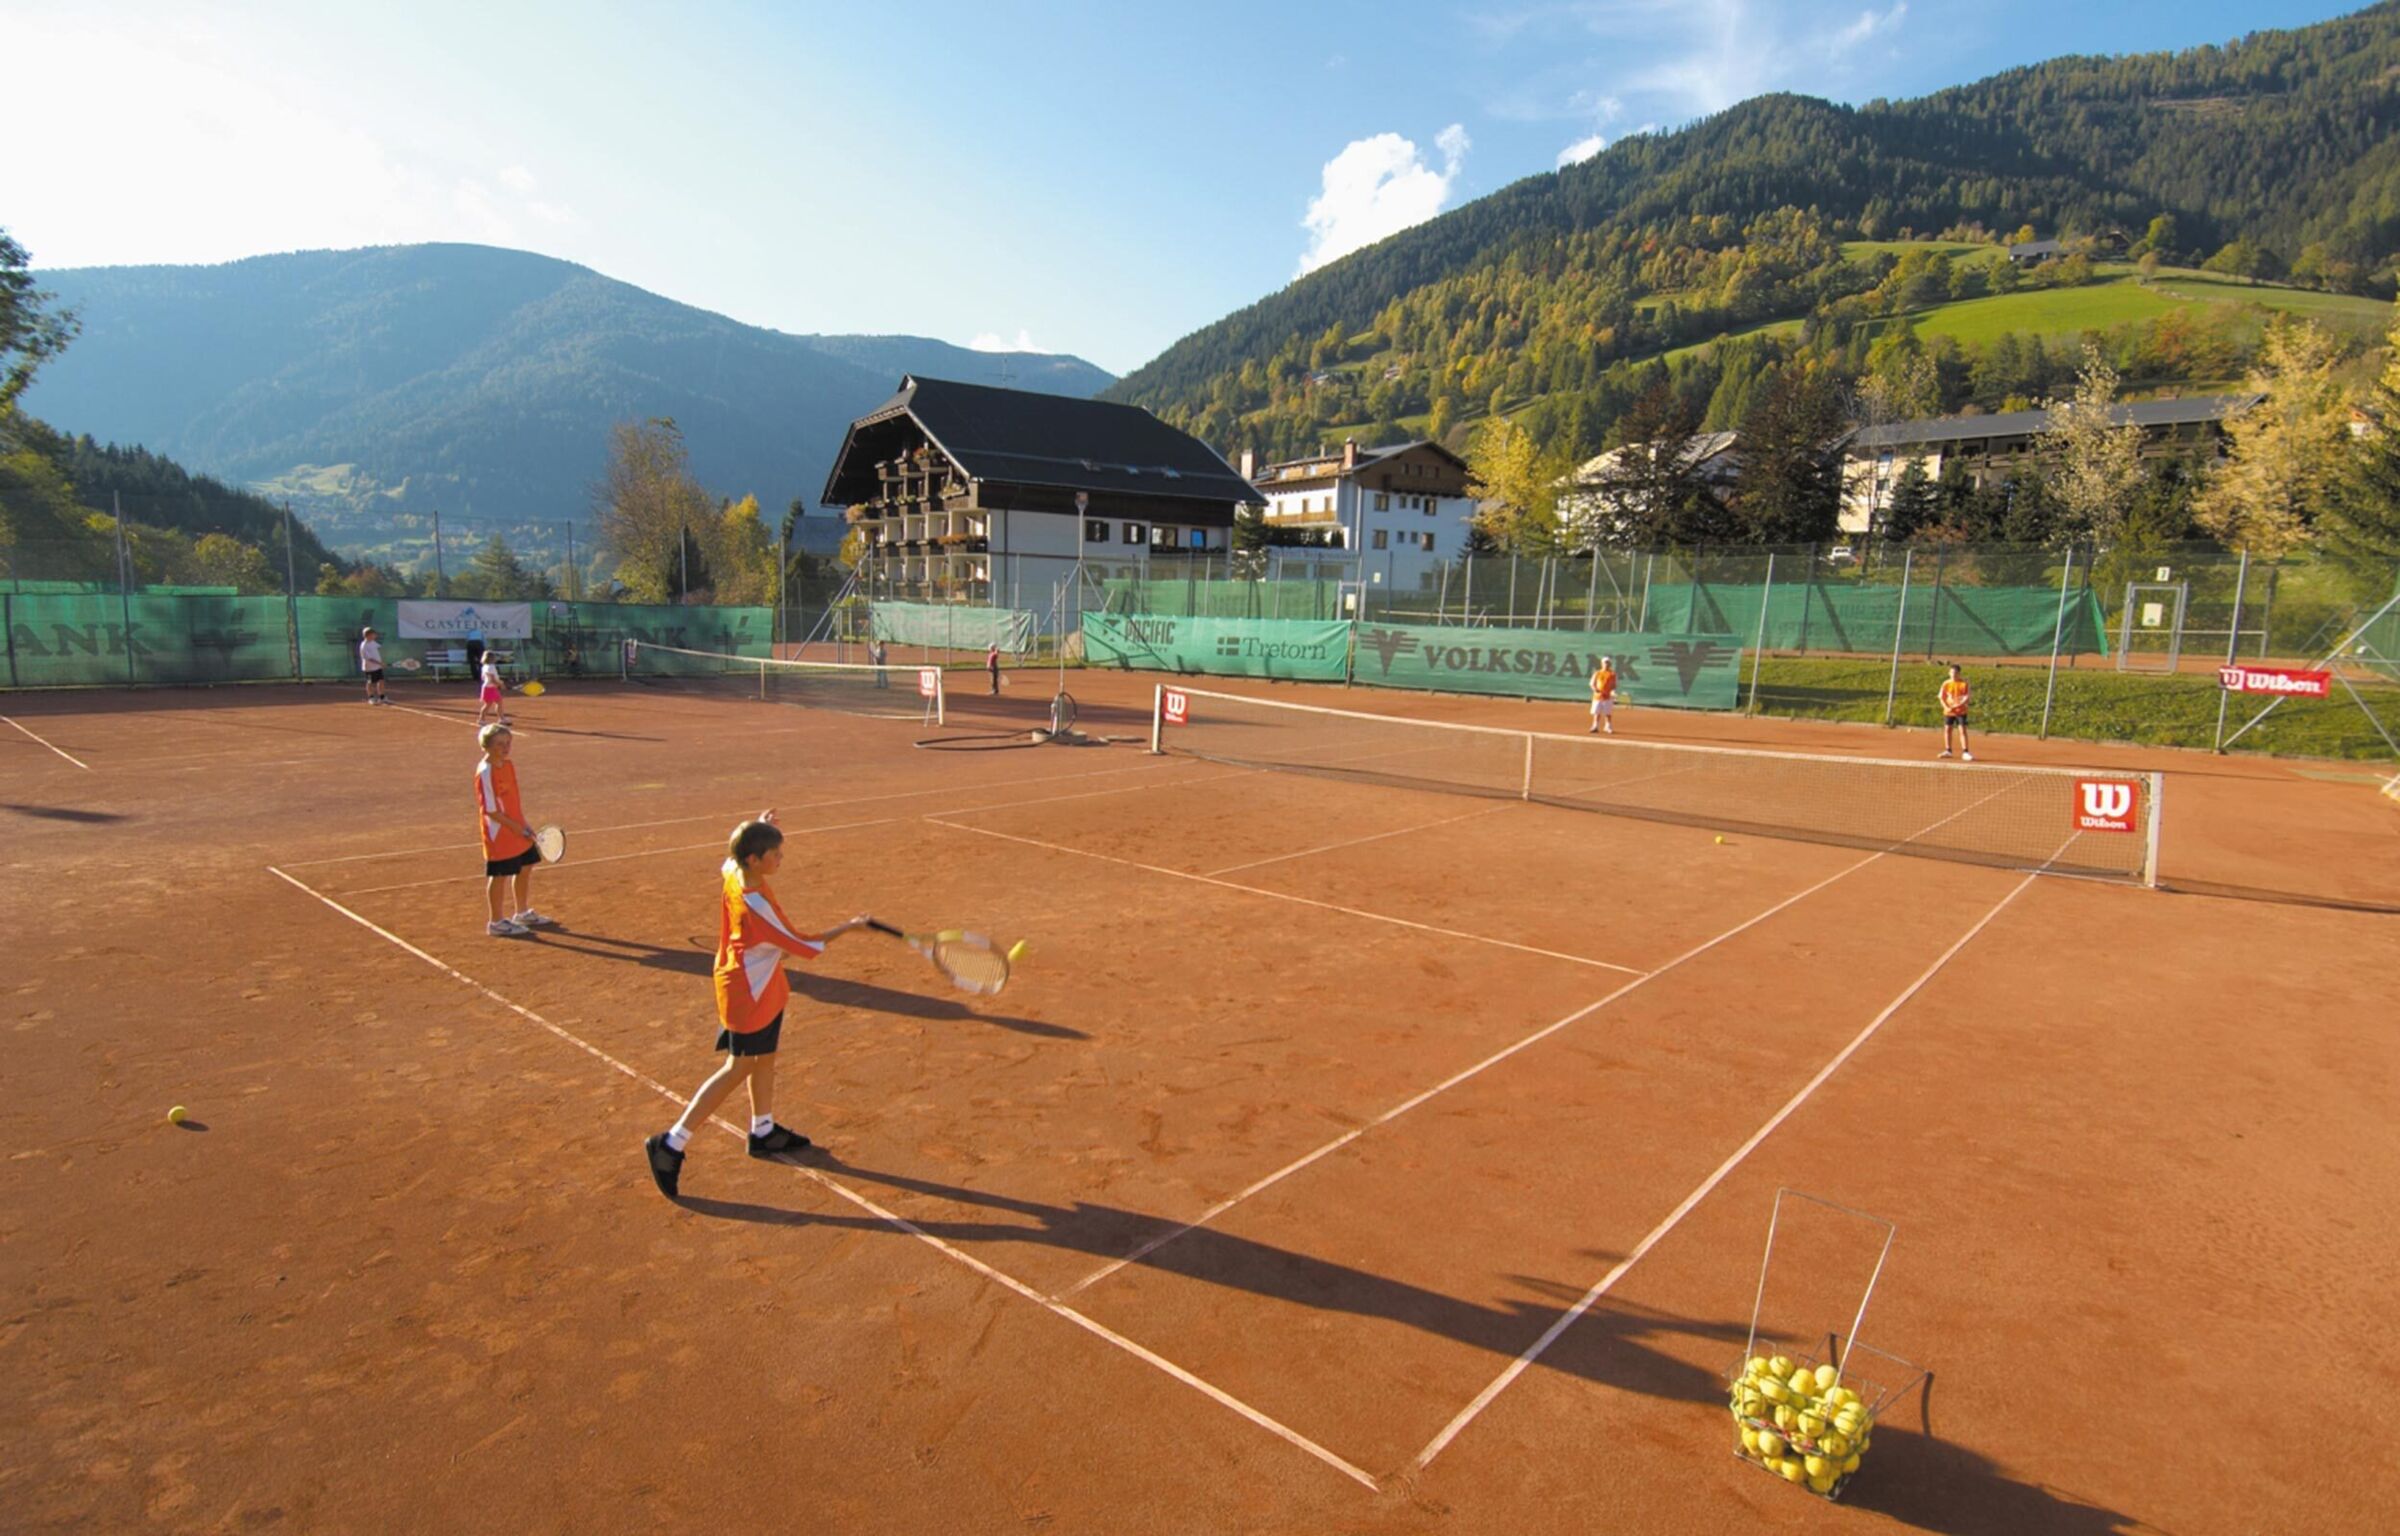 Children play doubles on a tennis court